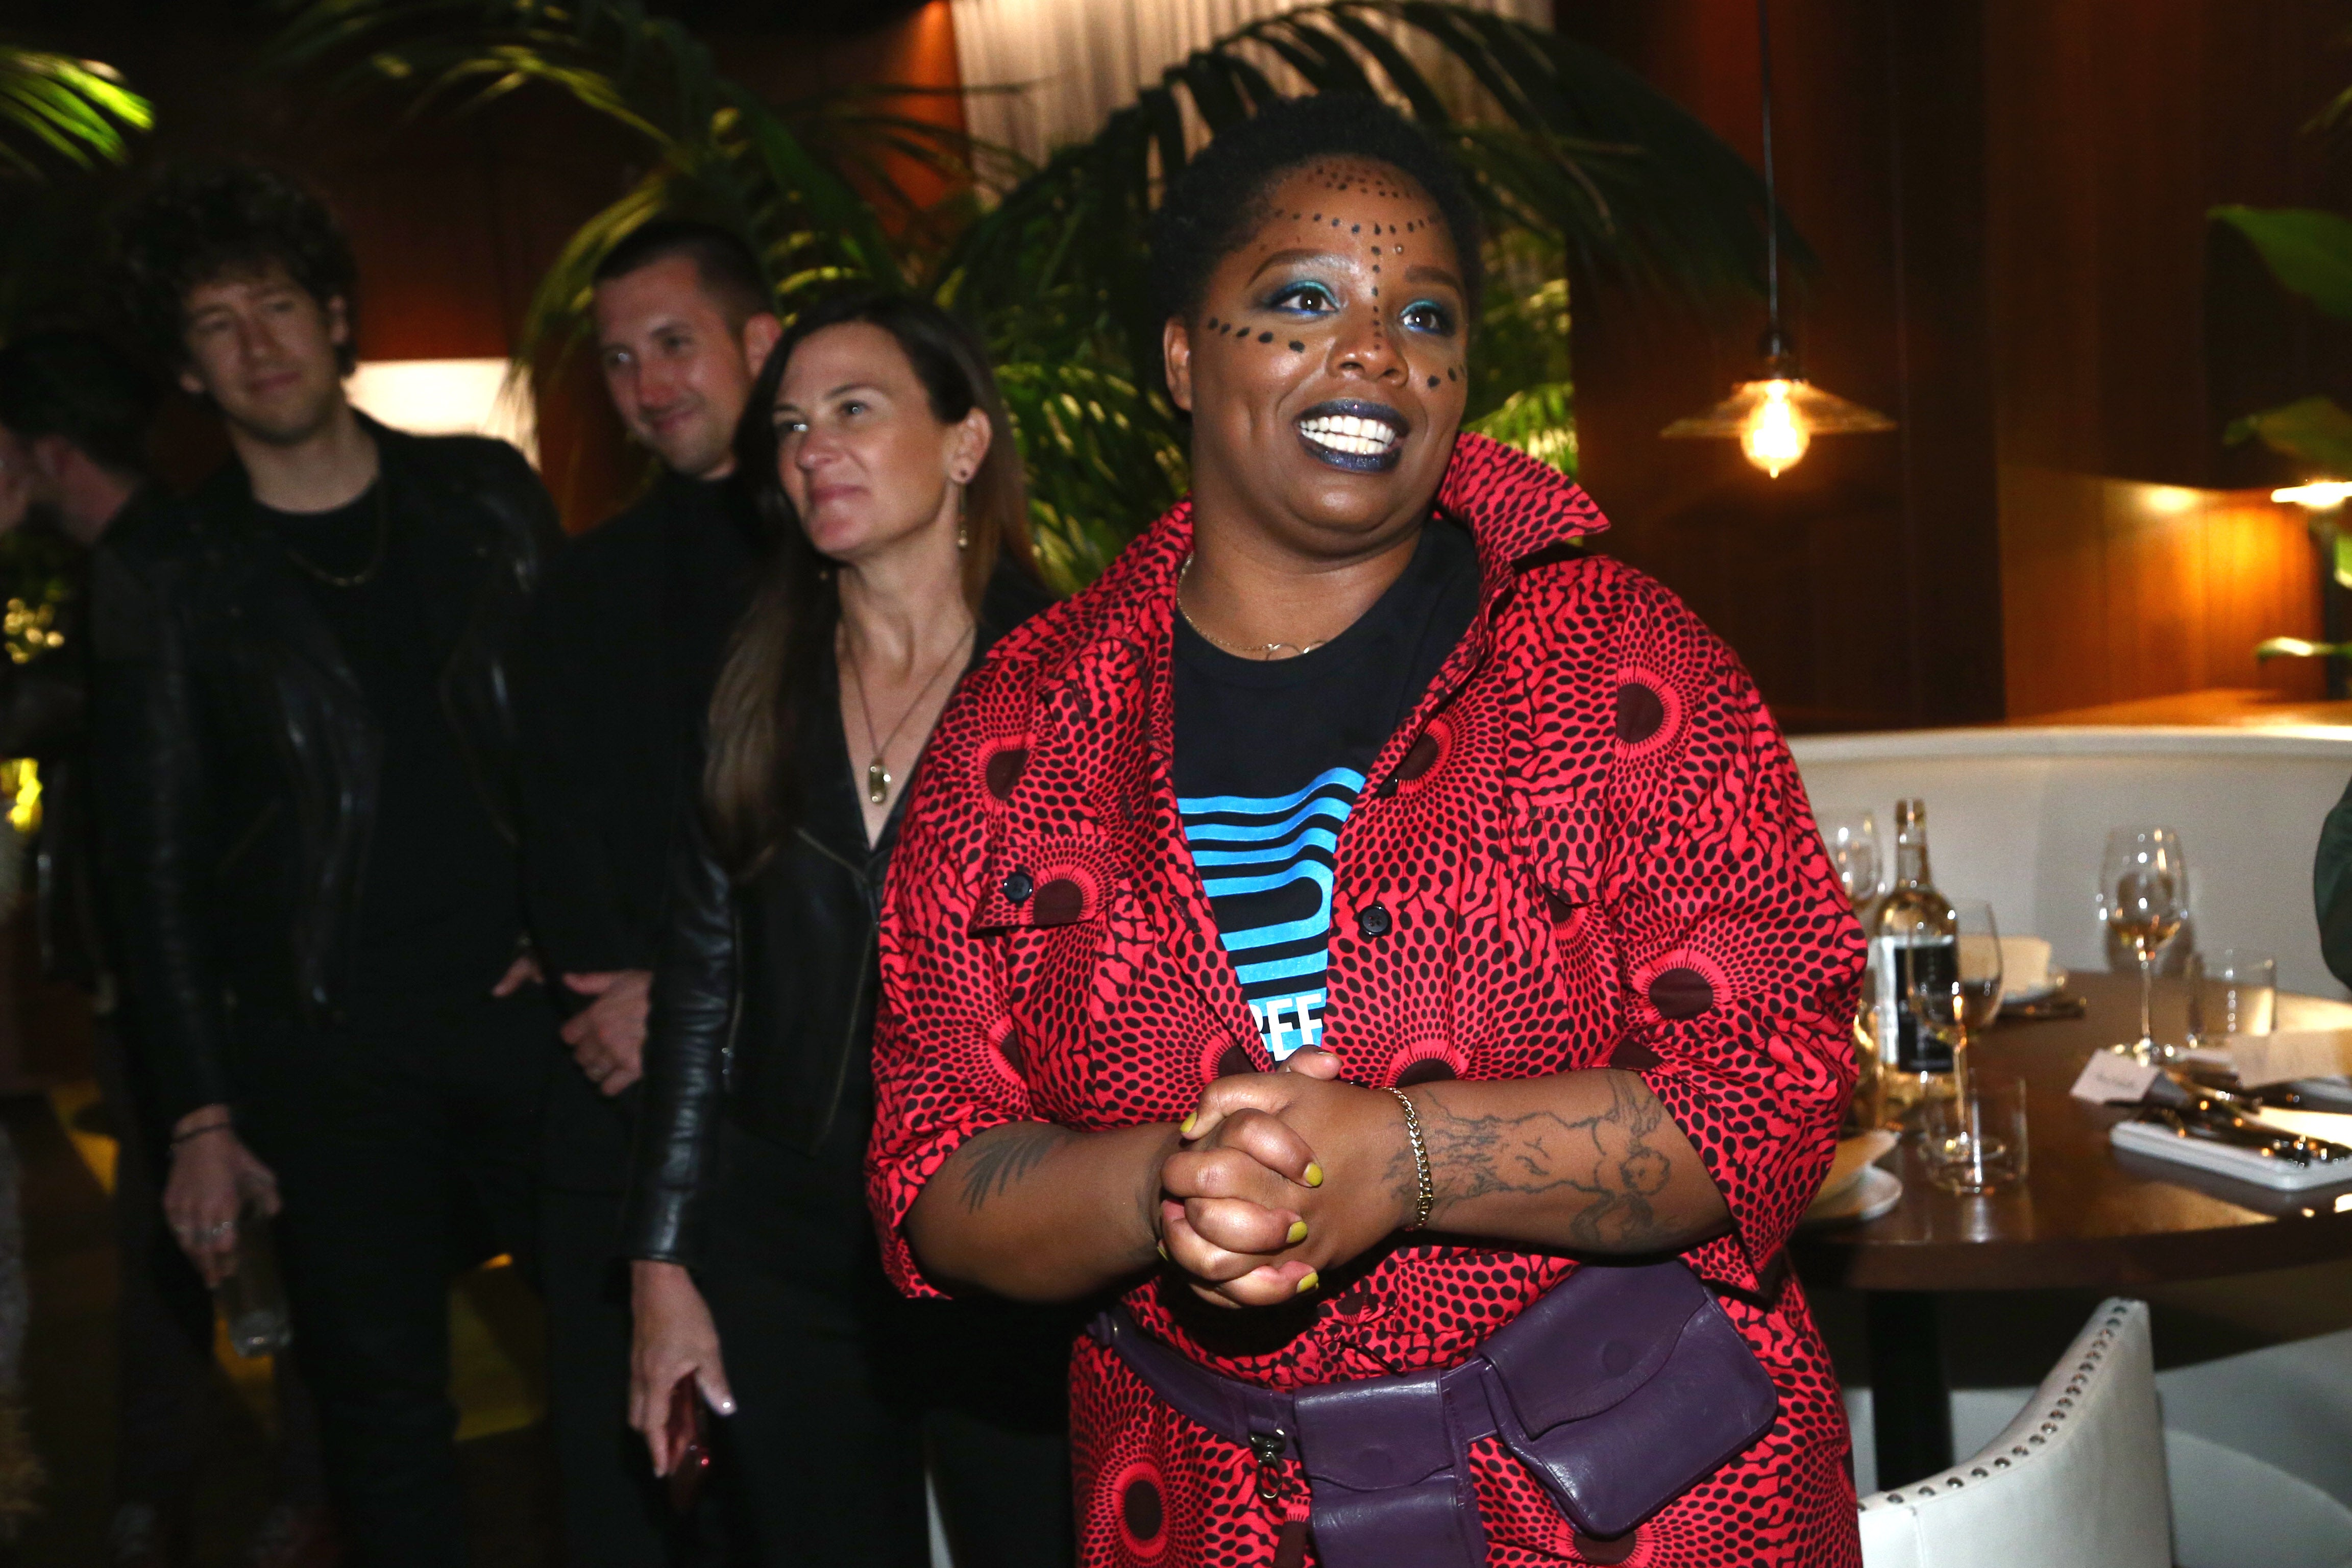 Patrisse Cullors, 37, maintains that right-wing attempts to discredit her and criticisms from other black activists had nothing to do with her decision to step down